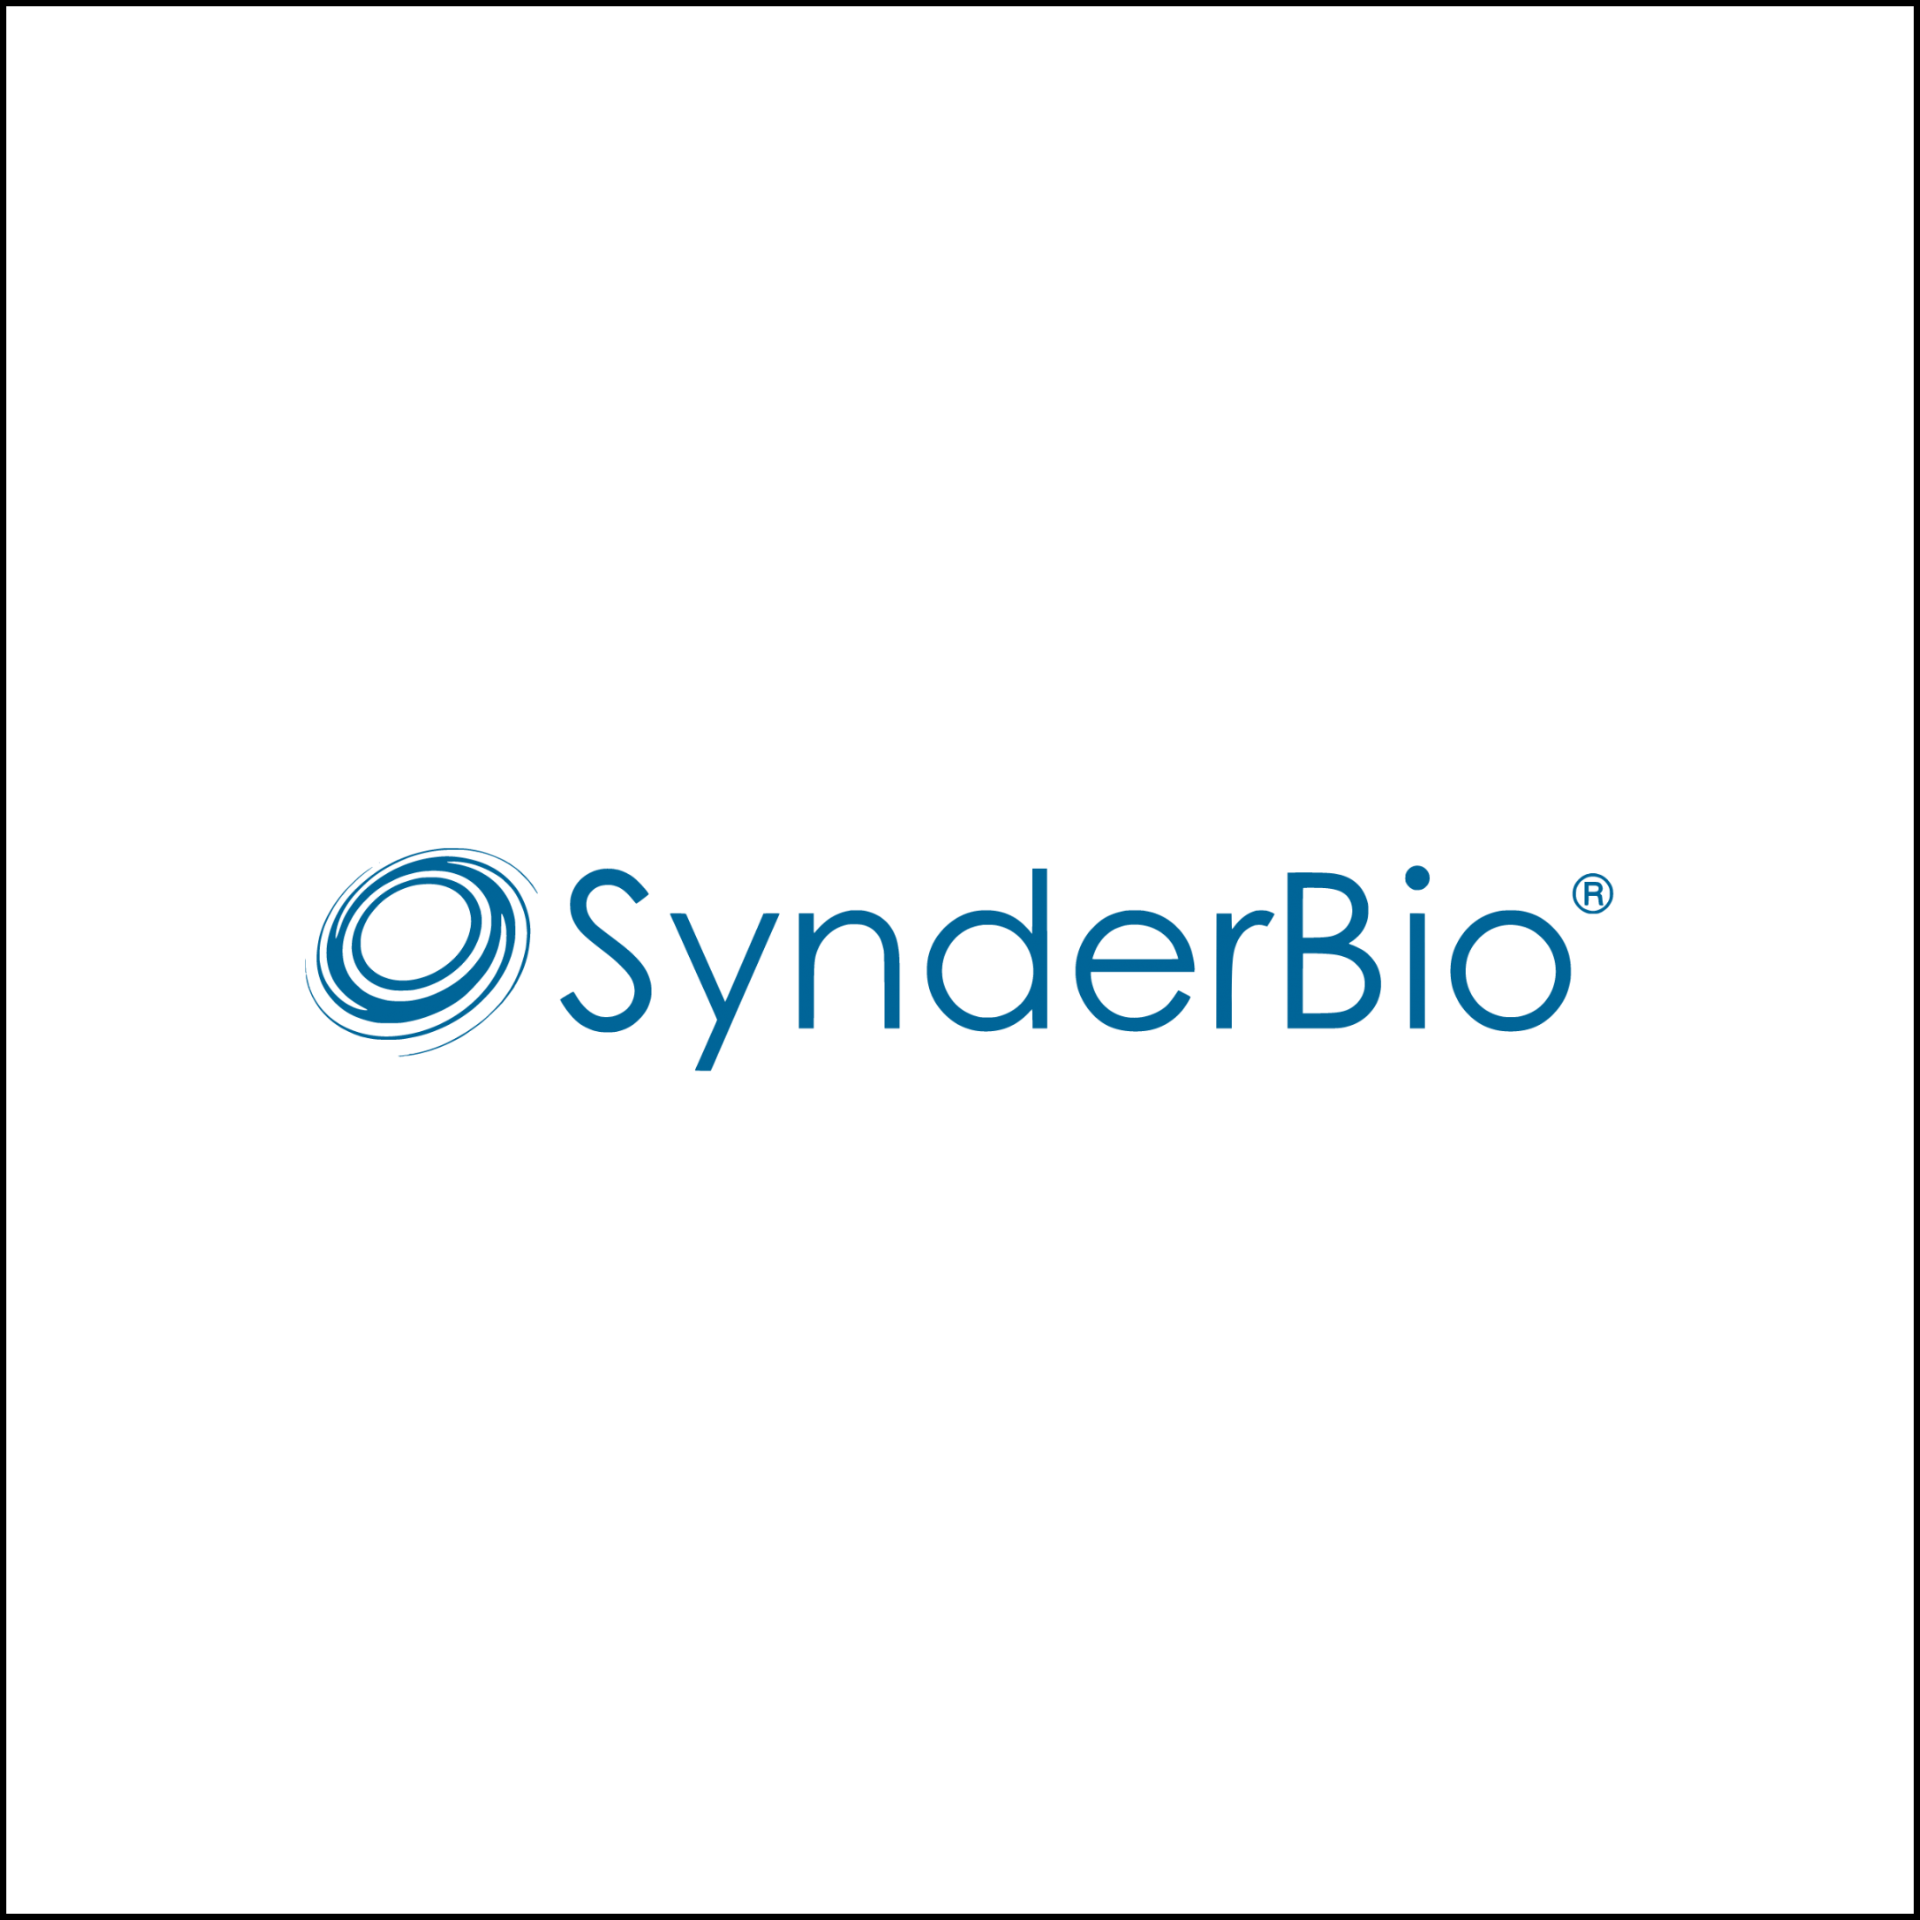 synderbio.png